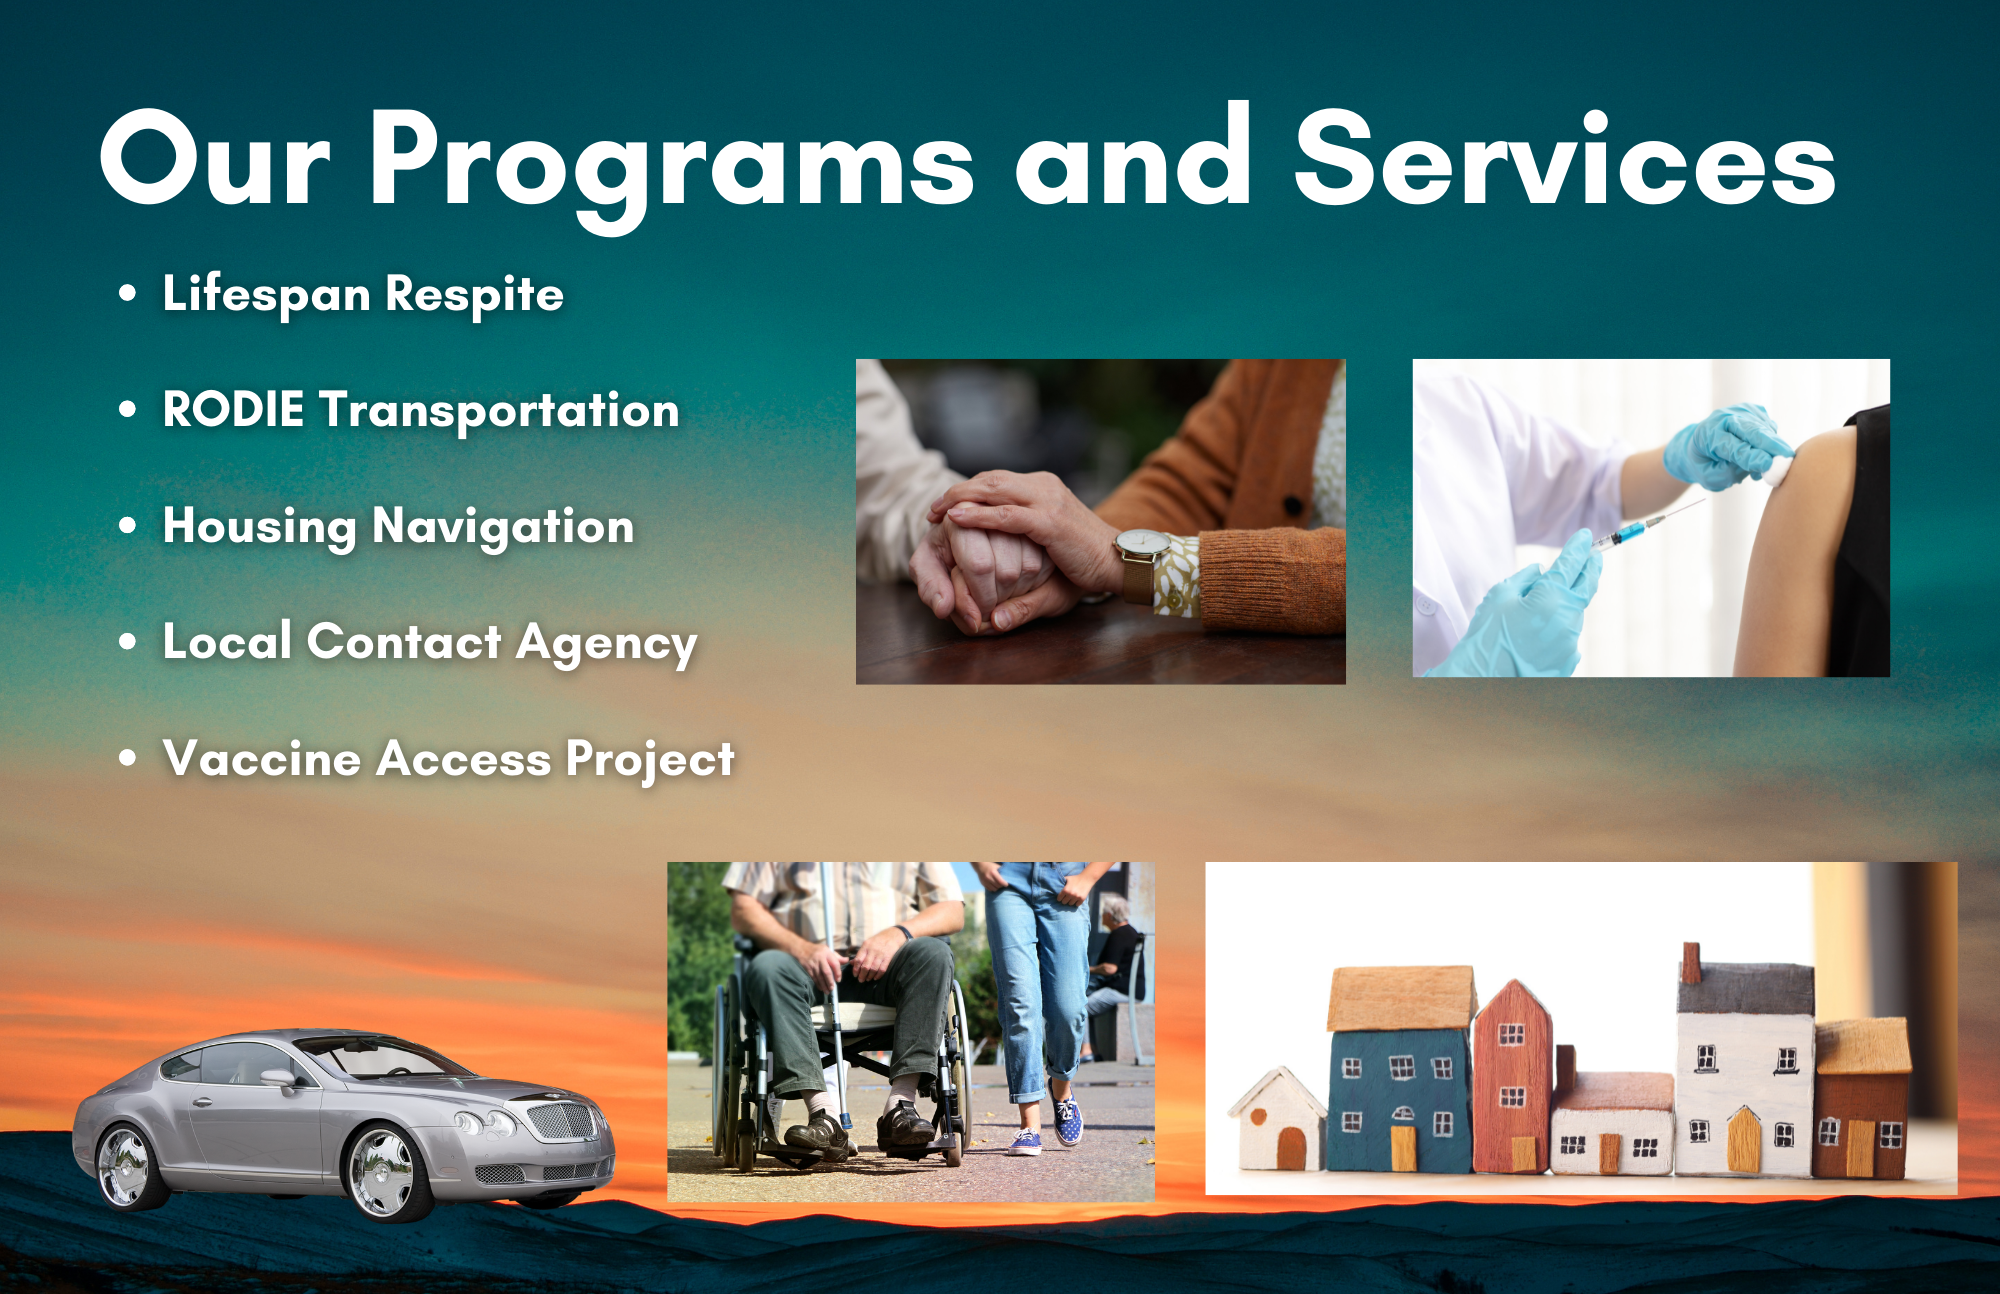 Our Programs and Services